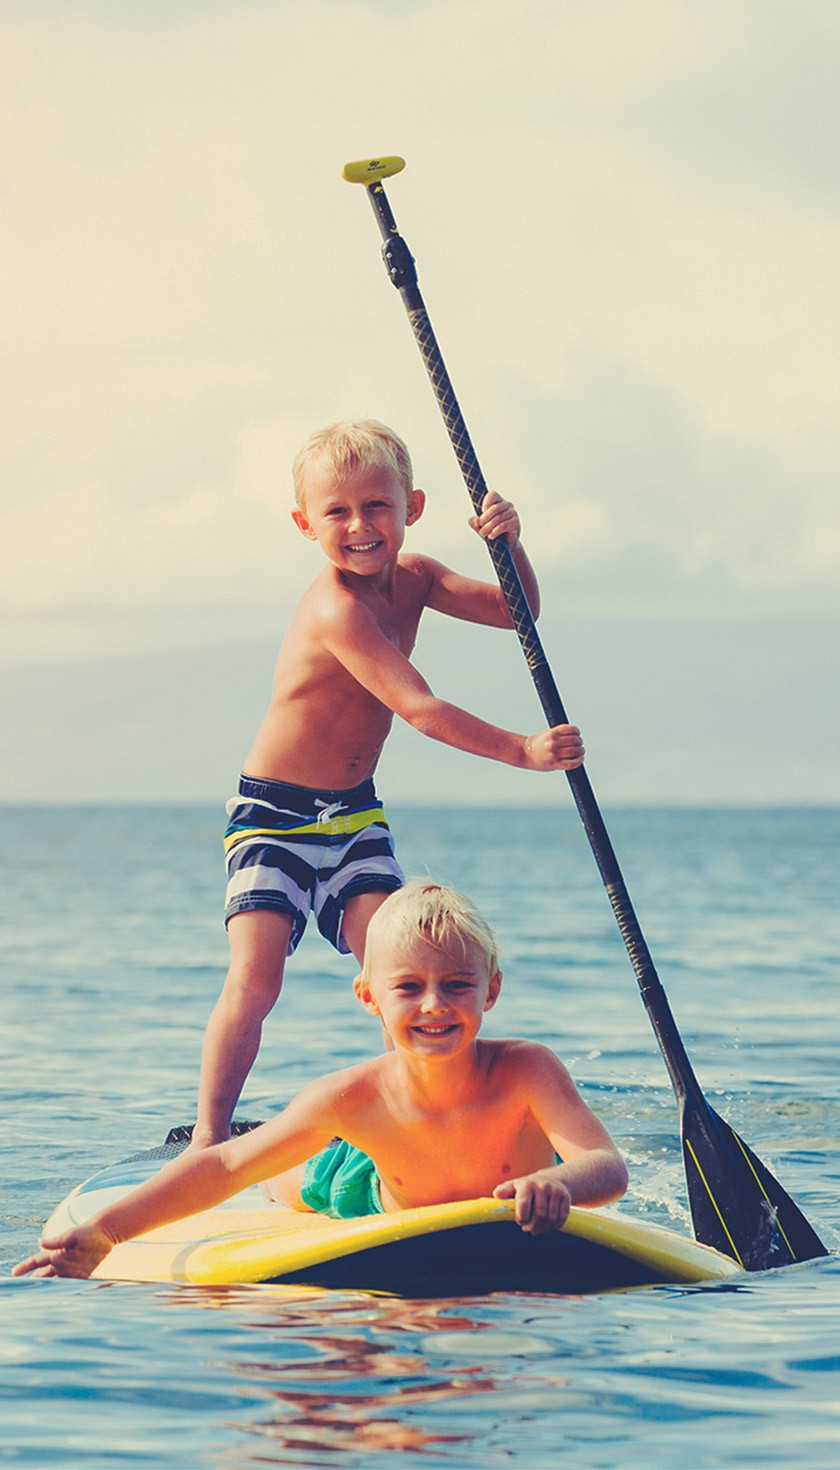 Brothers stand-up paddleboarding